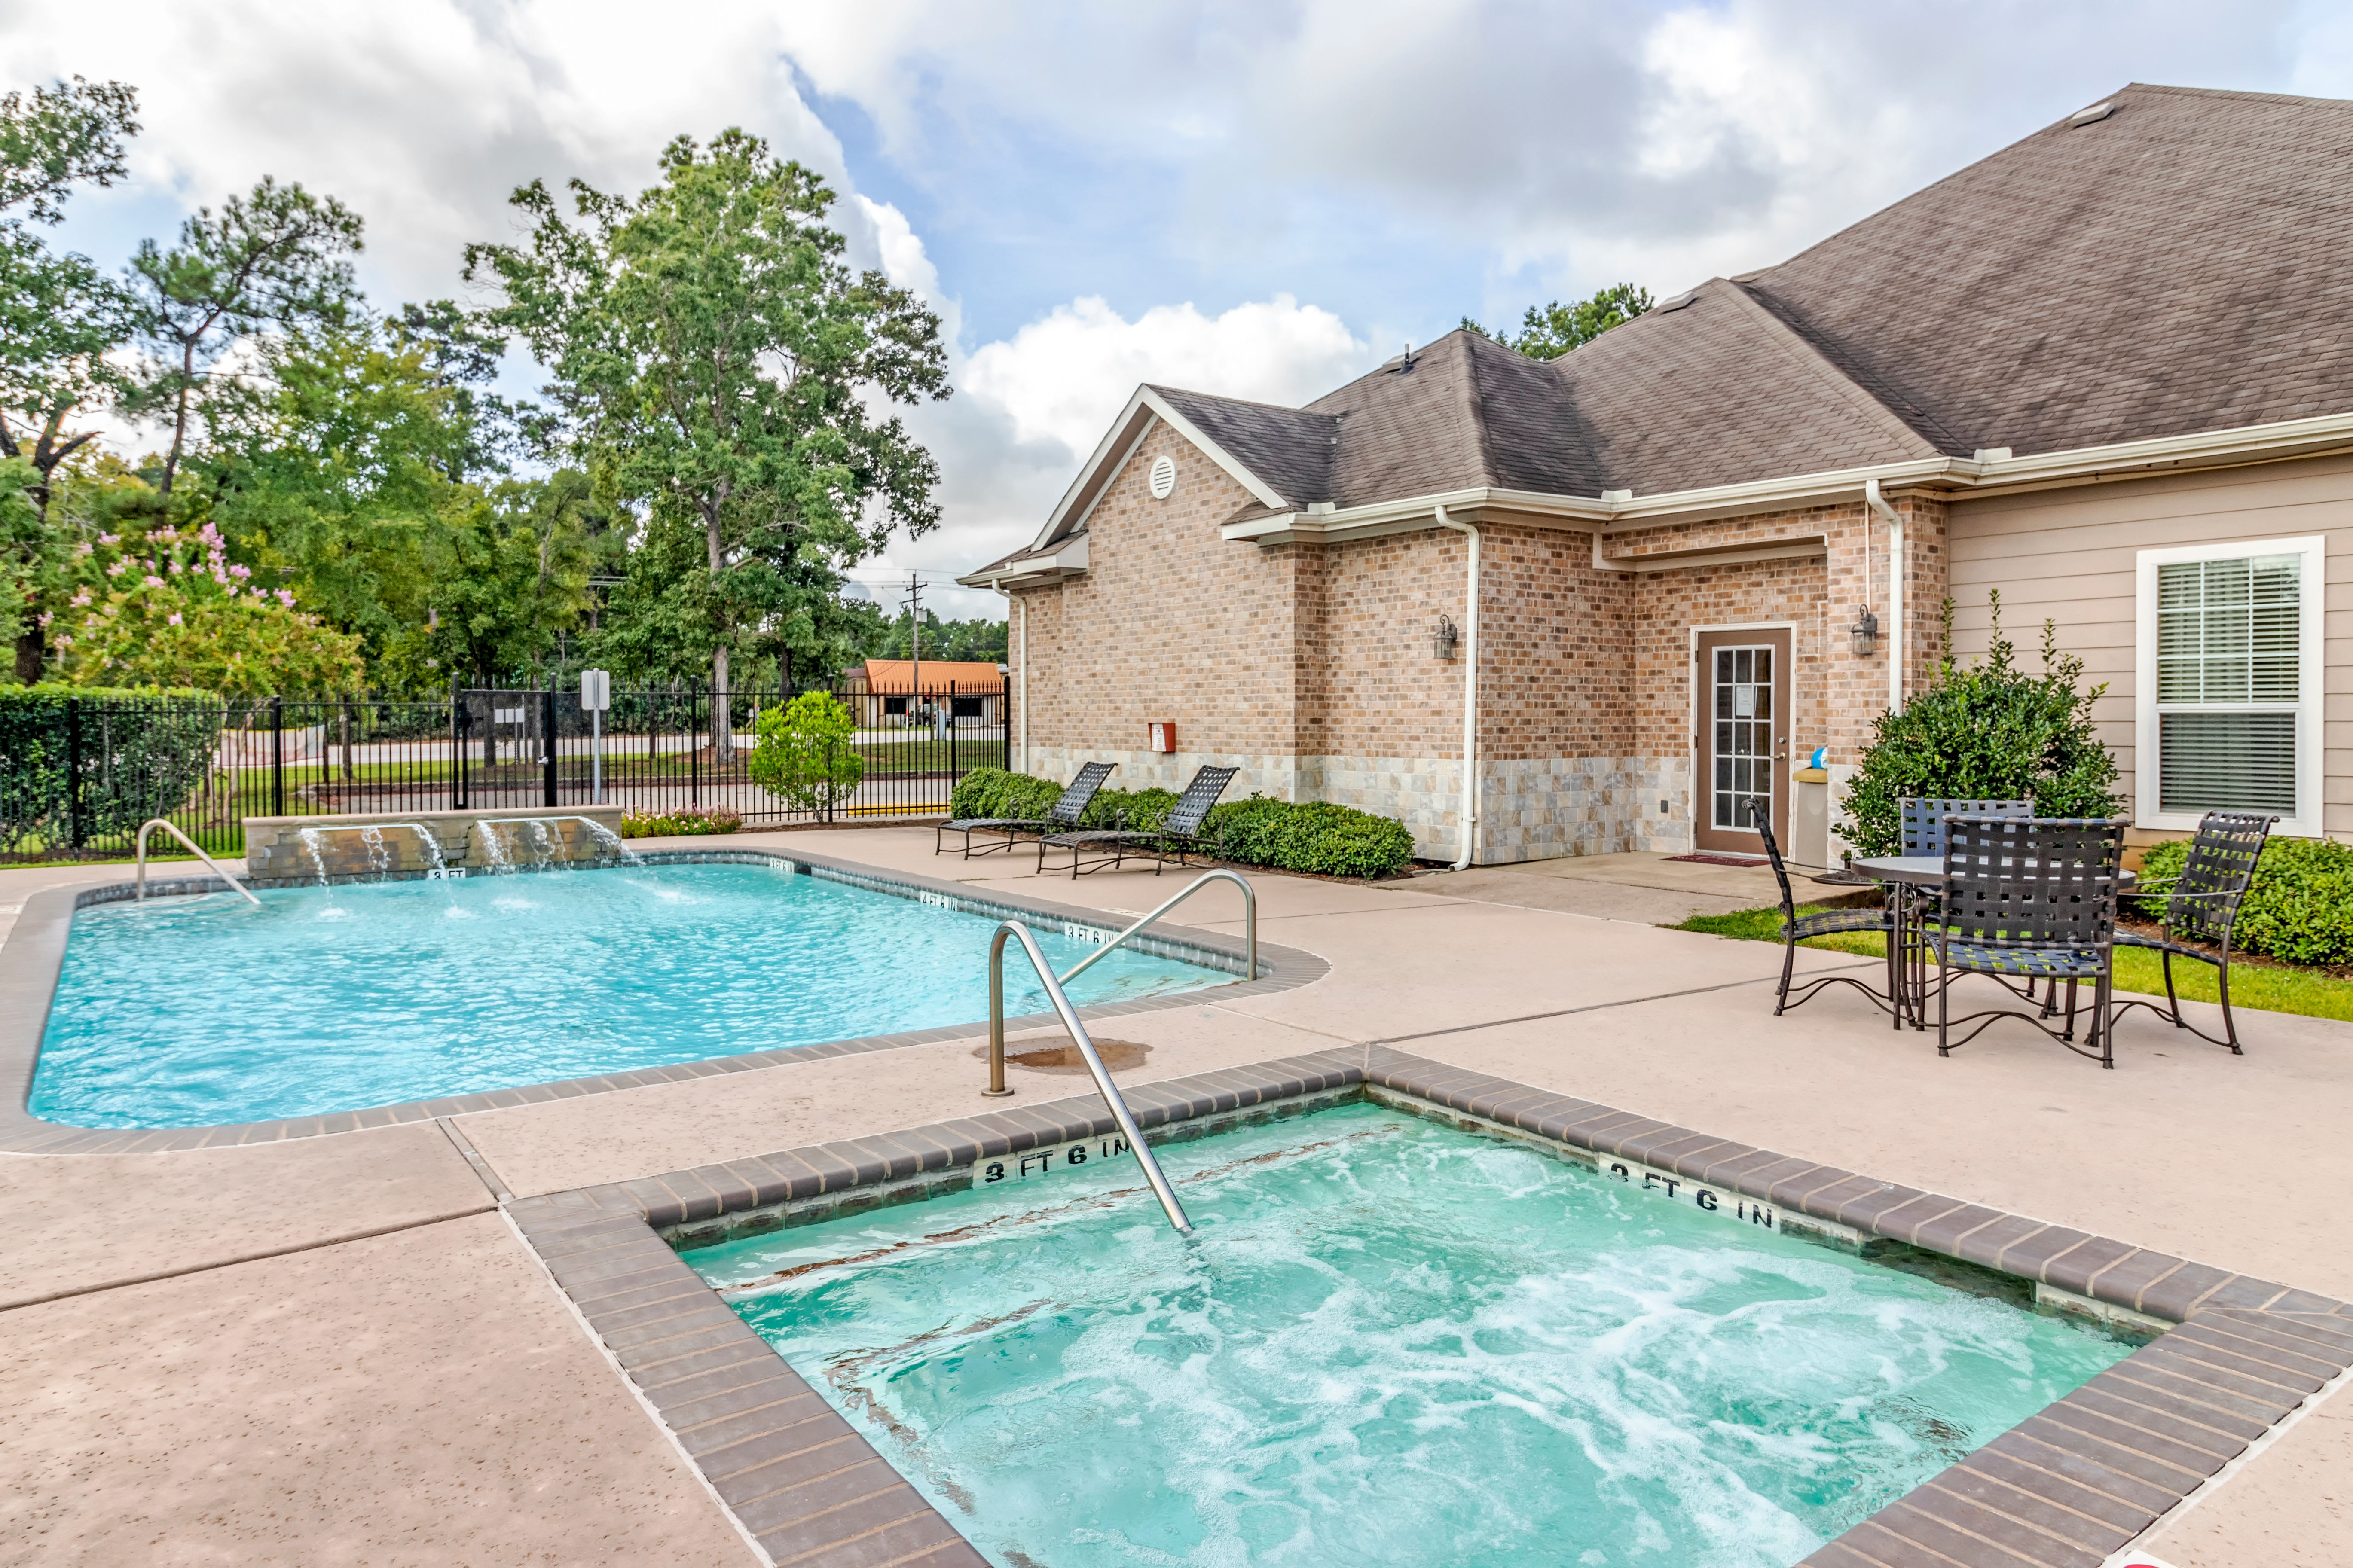 A swimming pool for summer days at Woodside Manor in Conroe, Texas